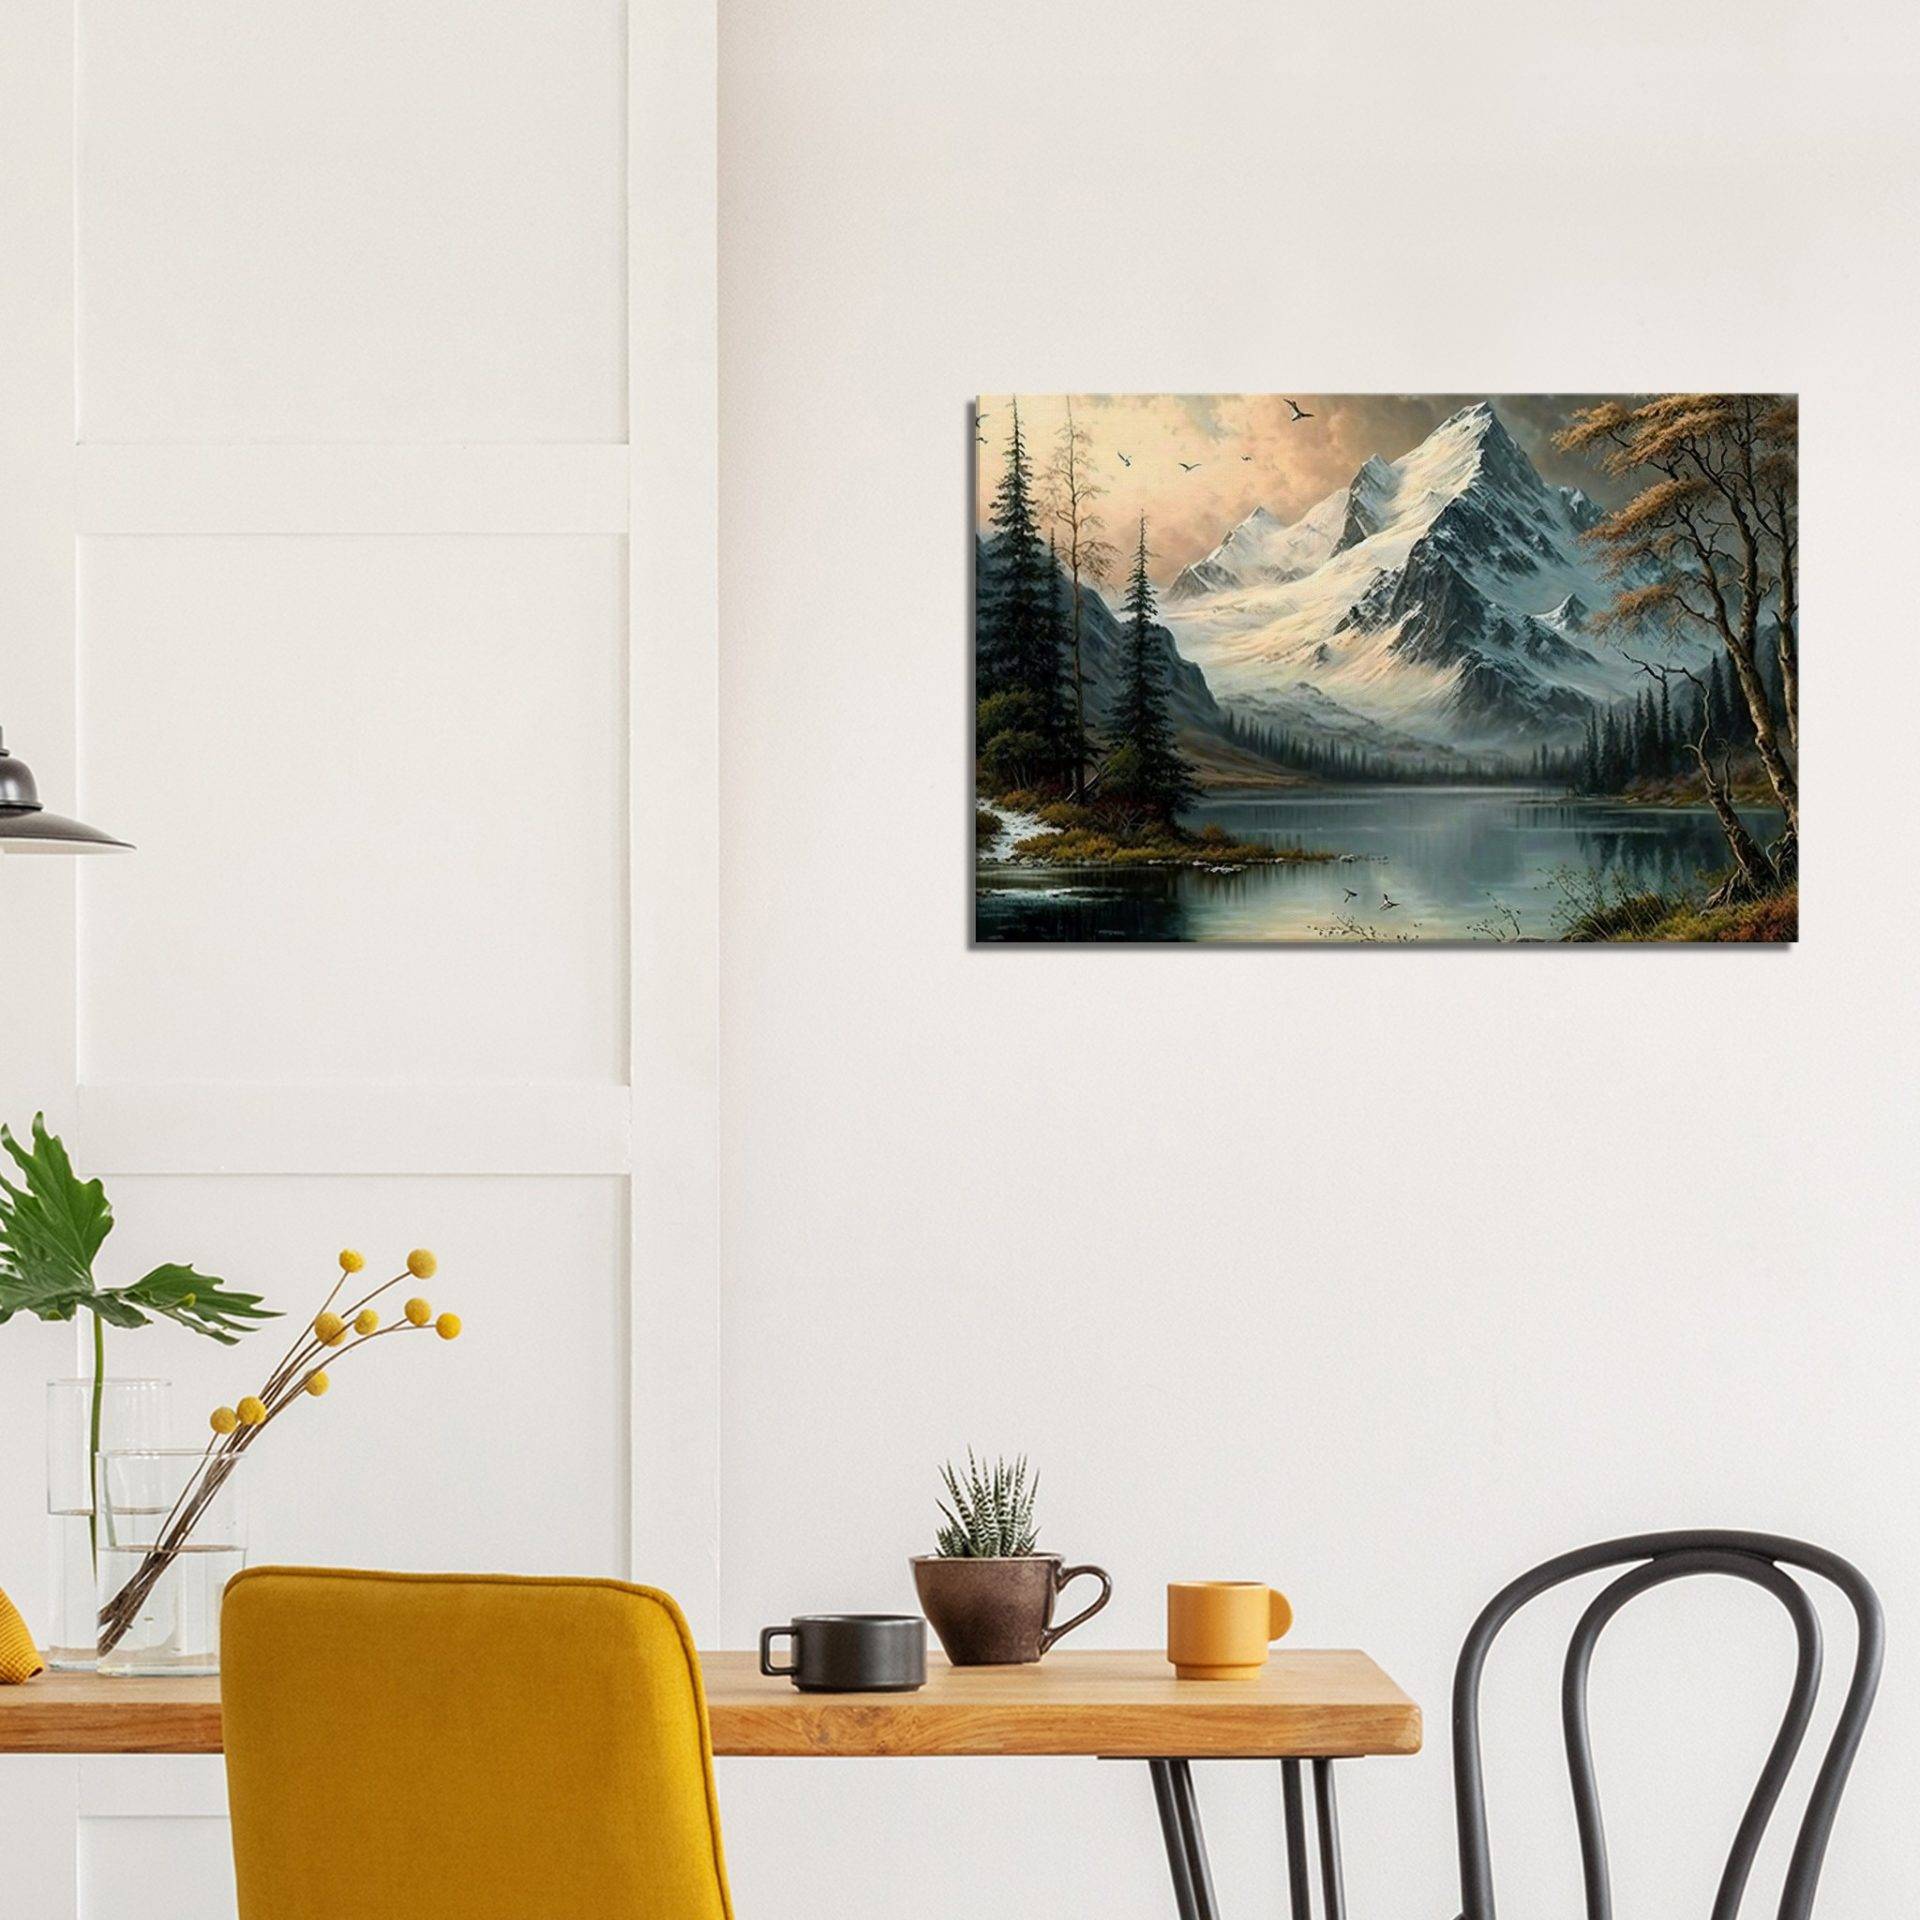 Tessin Landscape 8 (Canvas Print) Fabled Gallery https://fabledgallery.art/?post_type=product&p=37142